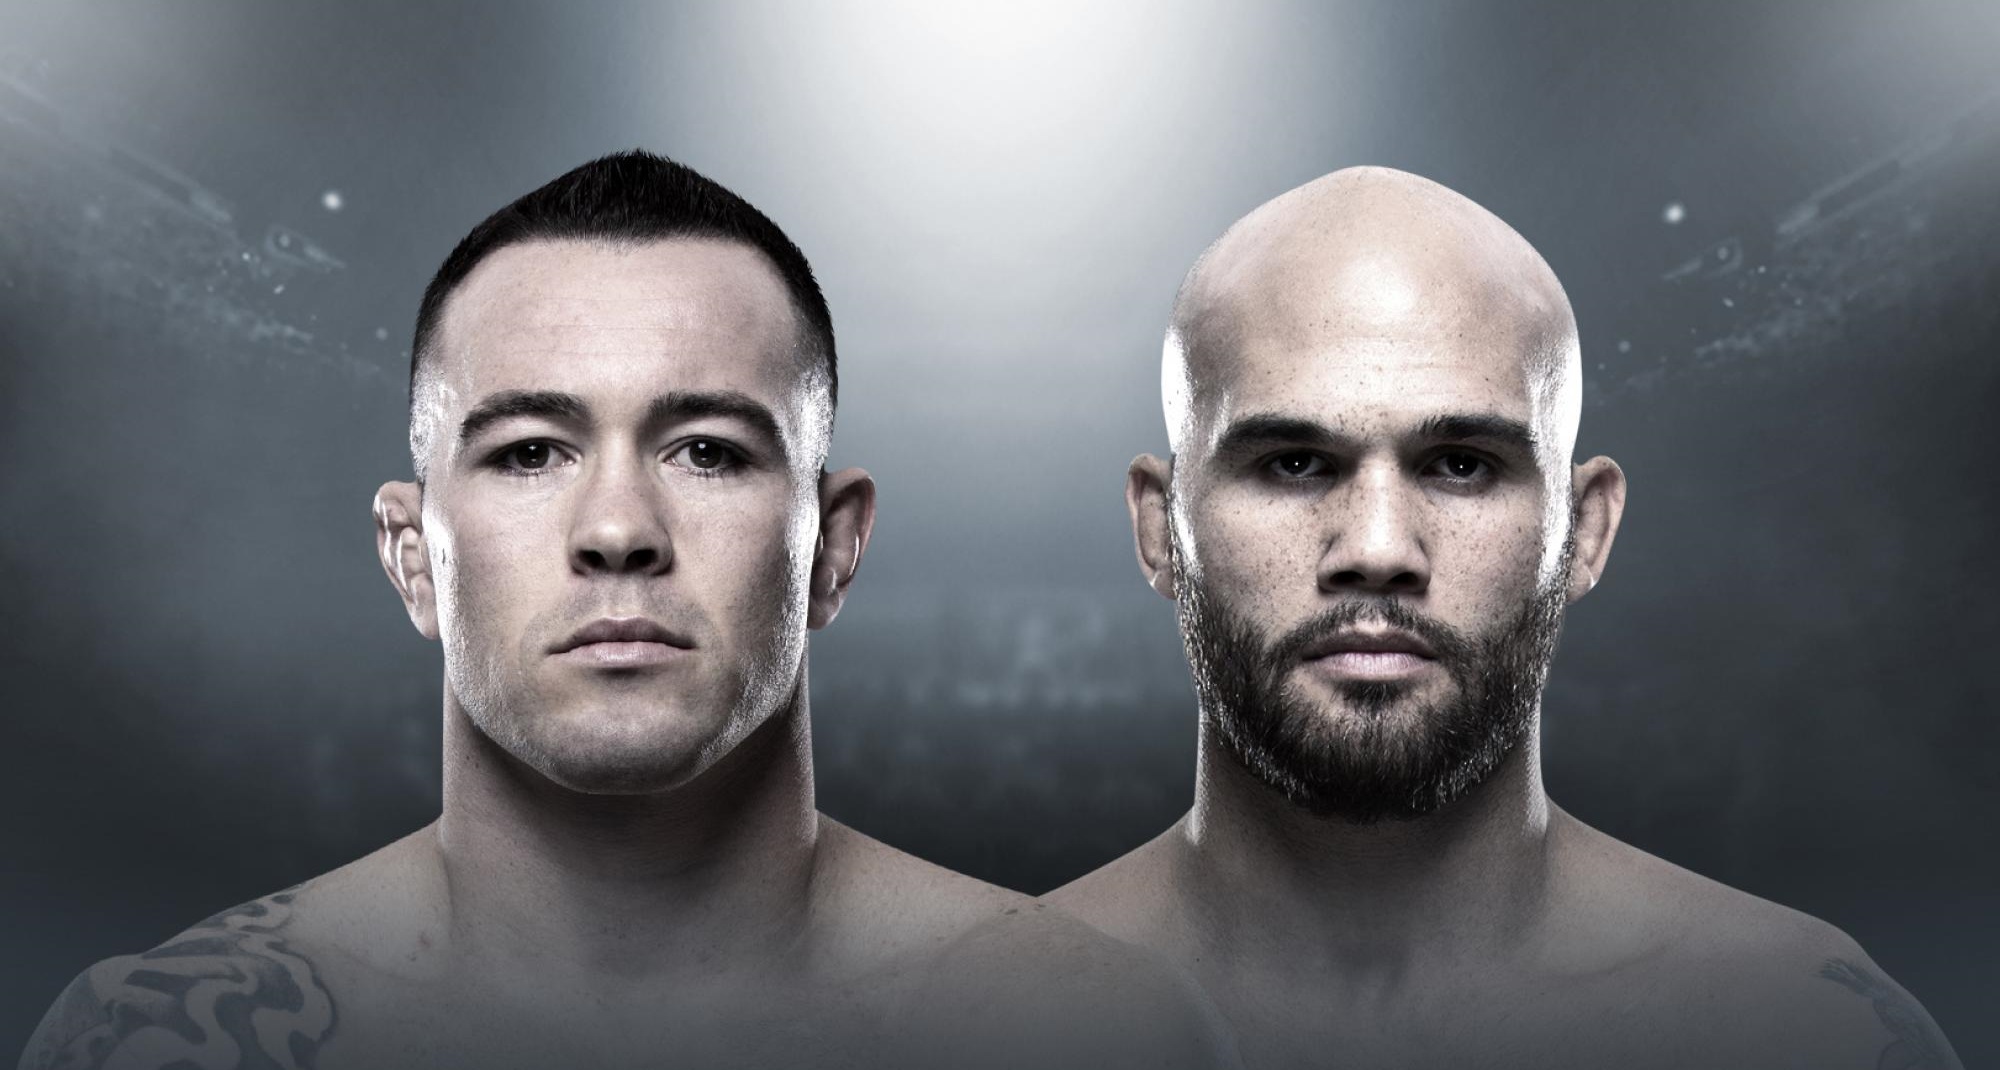 Robbie Lawler vs Colby Covington How to Watch